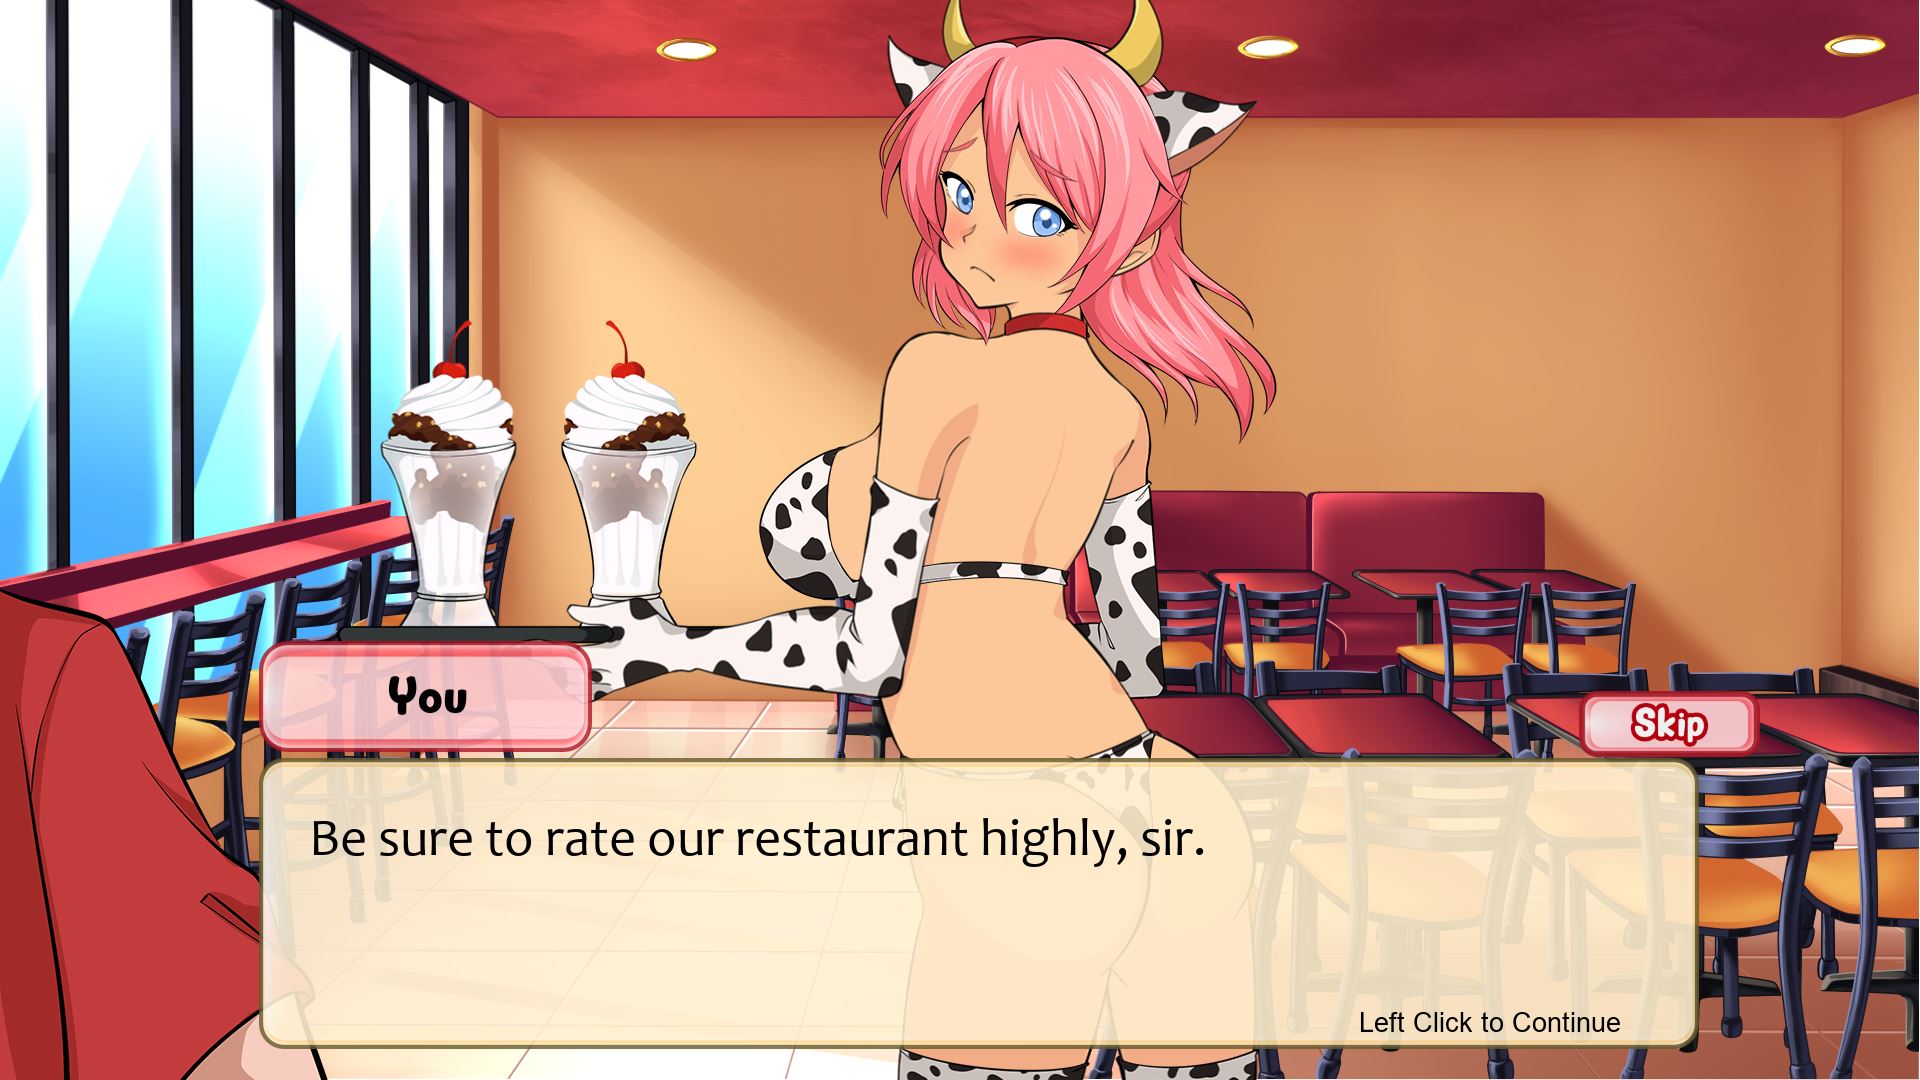 Food Hentai Games - Hire Me, Fuck Me, Give Me a Raise! Fast Food 3 Others Porn Sex Game v.0.1.2  Download for Windows, MacOS, Android